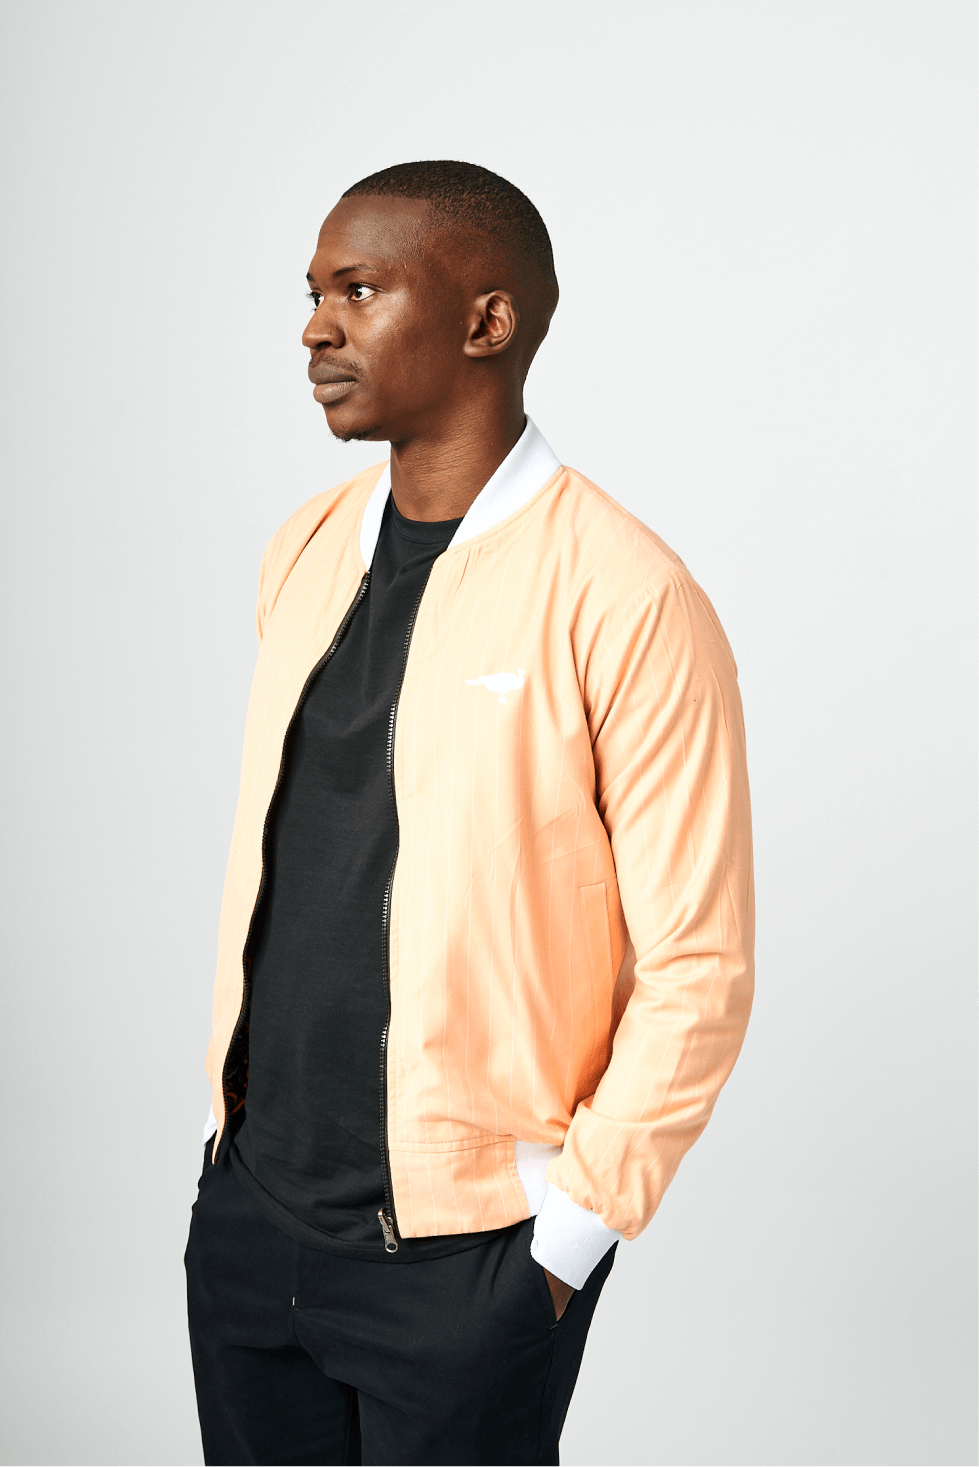 Shop Coral Double Sided Bomber Suit Jacket by Genteel on Arrai. Discover stylish, affordable clothing, jewelry, handbags and unique handmade pieces from top Kenyan & African fashion brands prioritising sustainability and quality craftsmanship.